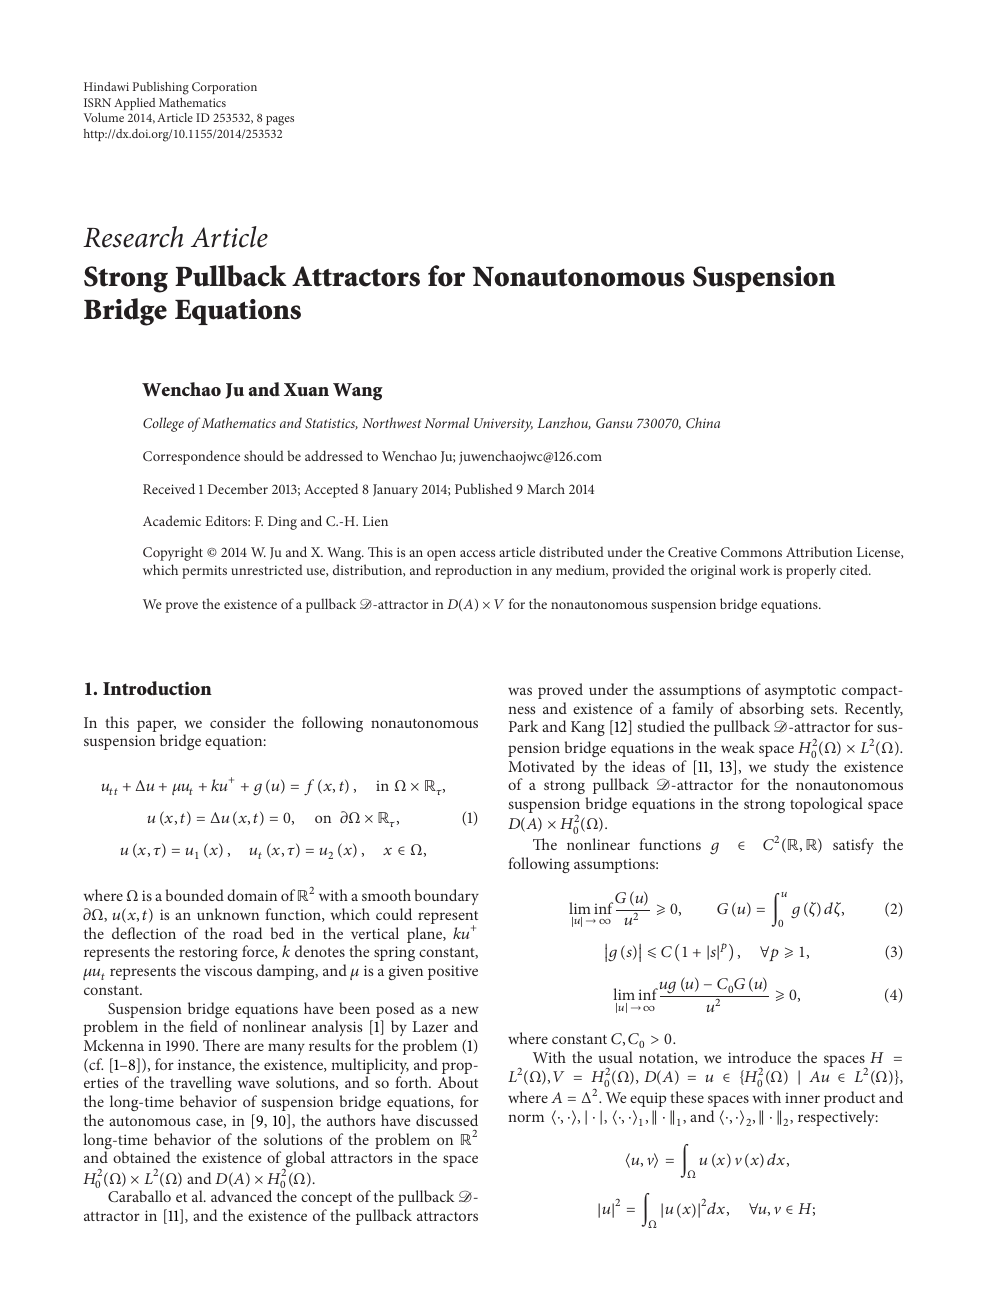 Strong Pullback Attractors For Nonautonomous Suspension Bridge Equations Topic Of Research Paper In Mathematics Download Scholarly Article Pdf And Read For Free On Cyberleninka Open Science Hub